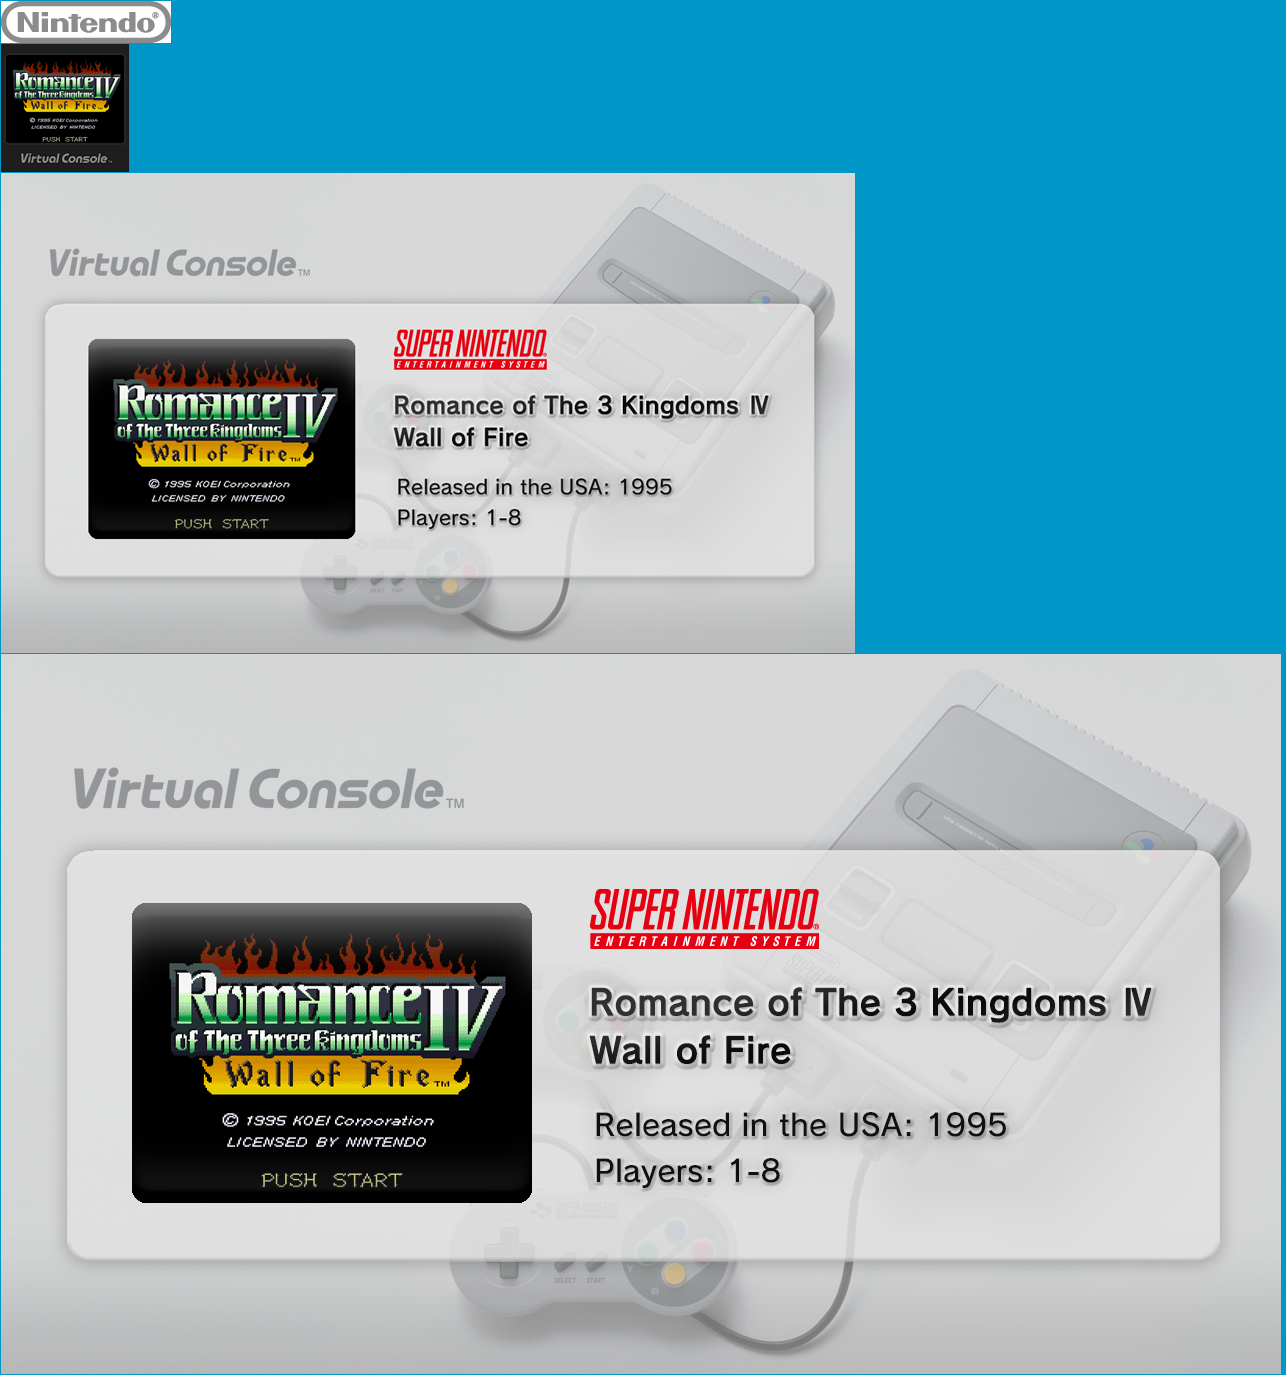 Virtual Console - Romance of The 3 Kingdoms IV Wall of Fire